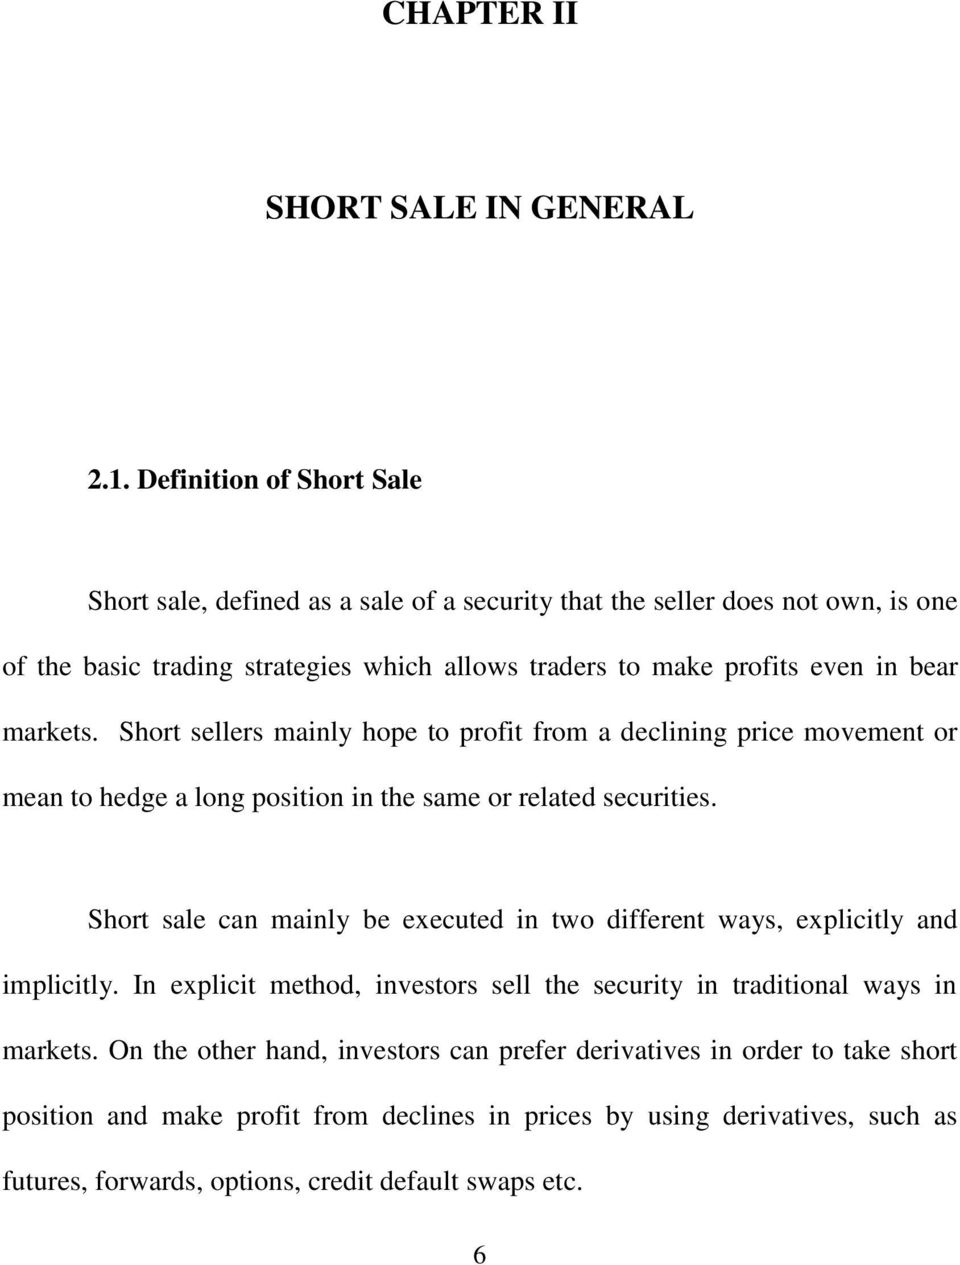 impacts of short selling restrictions on stocks traded at borsa